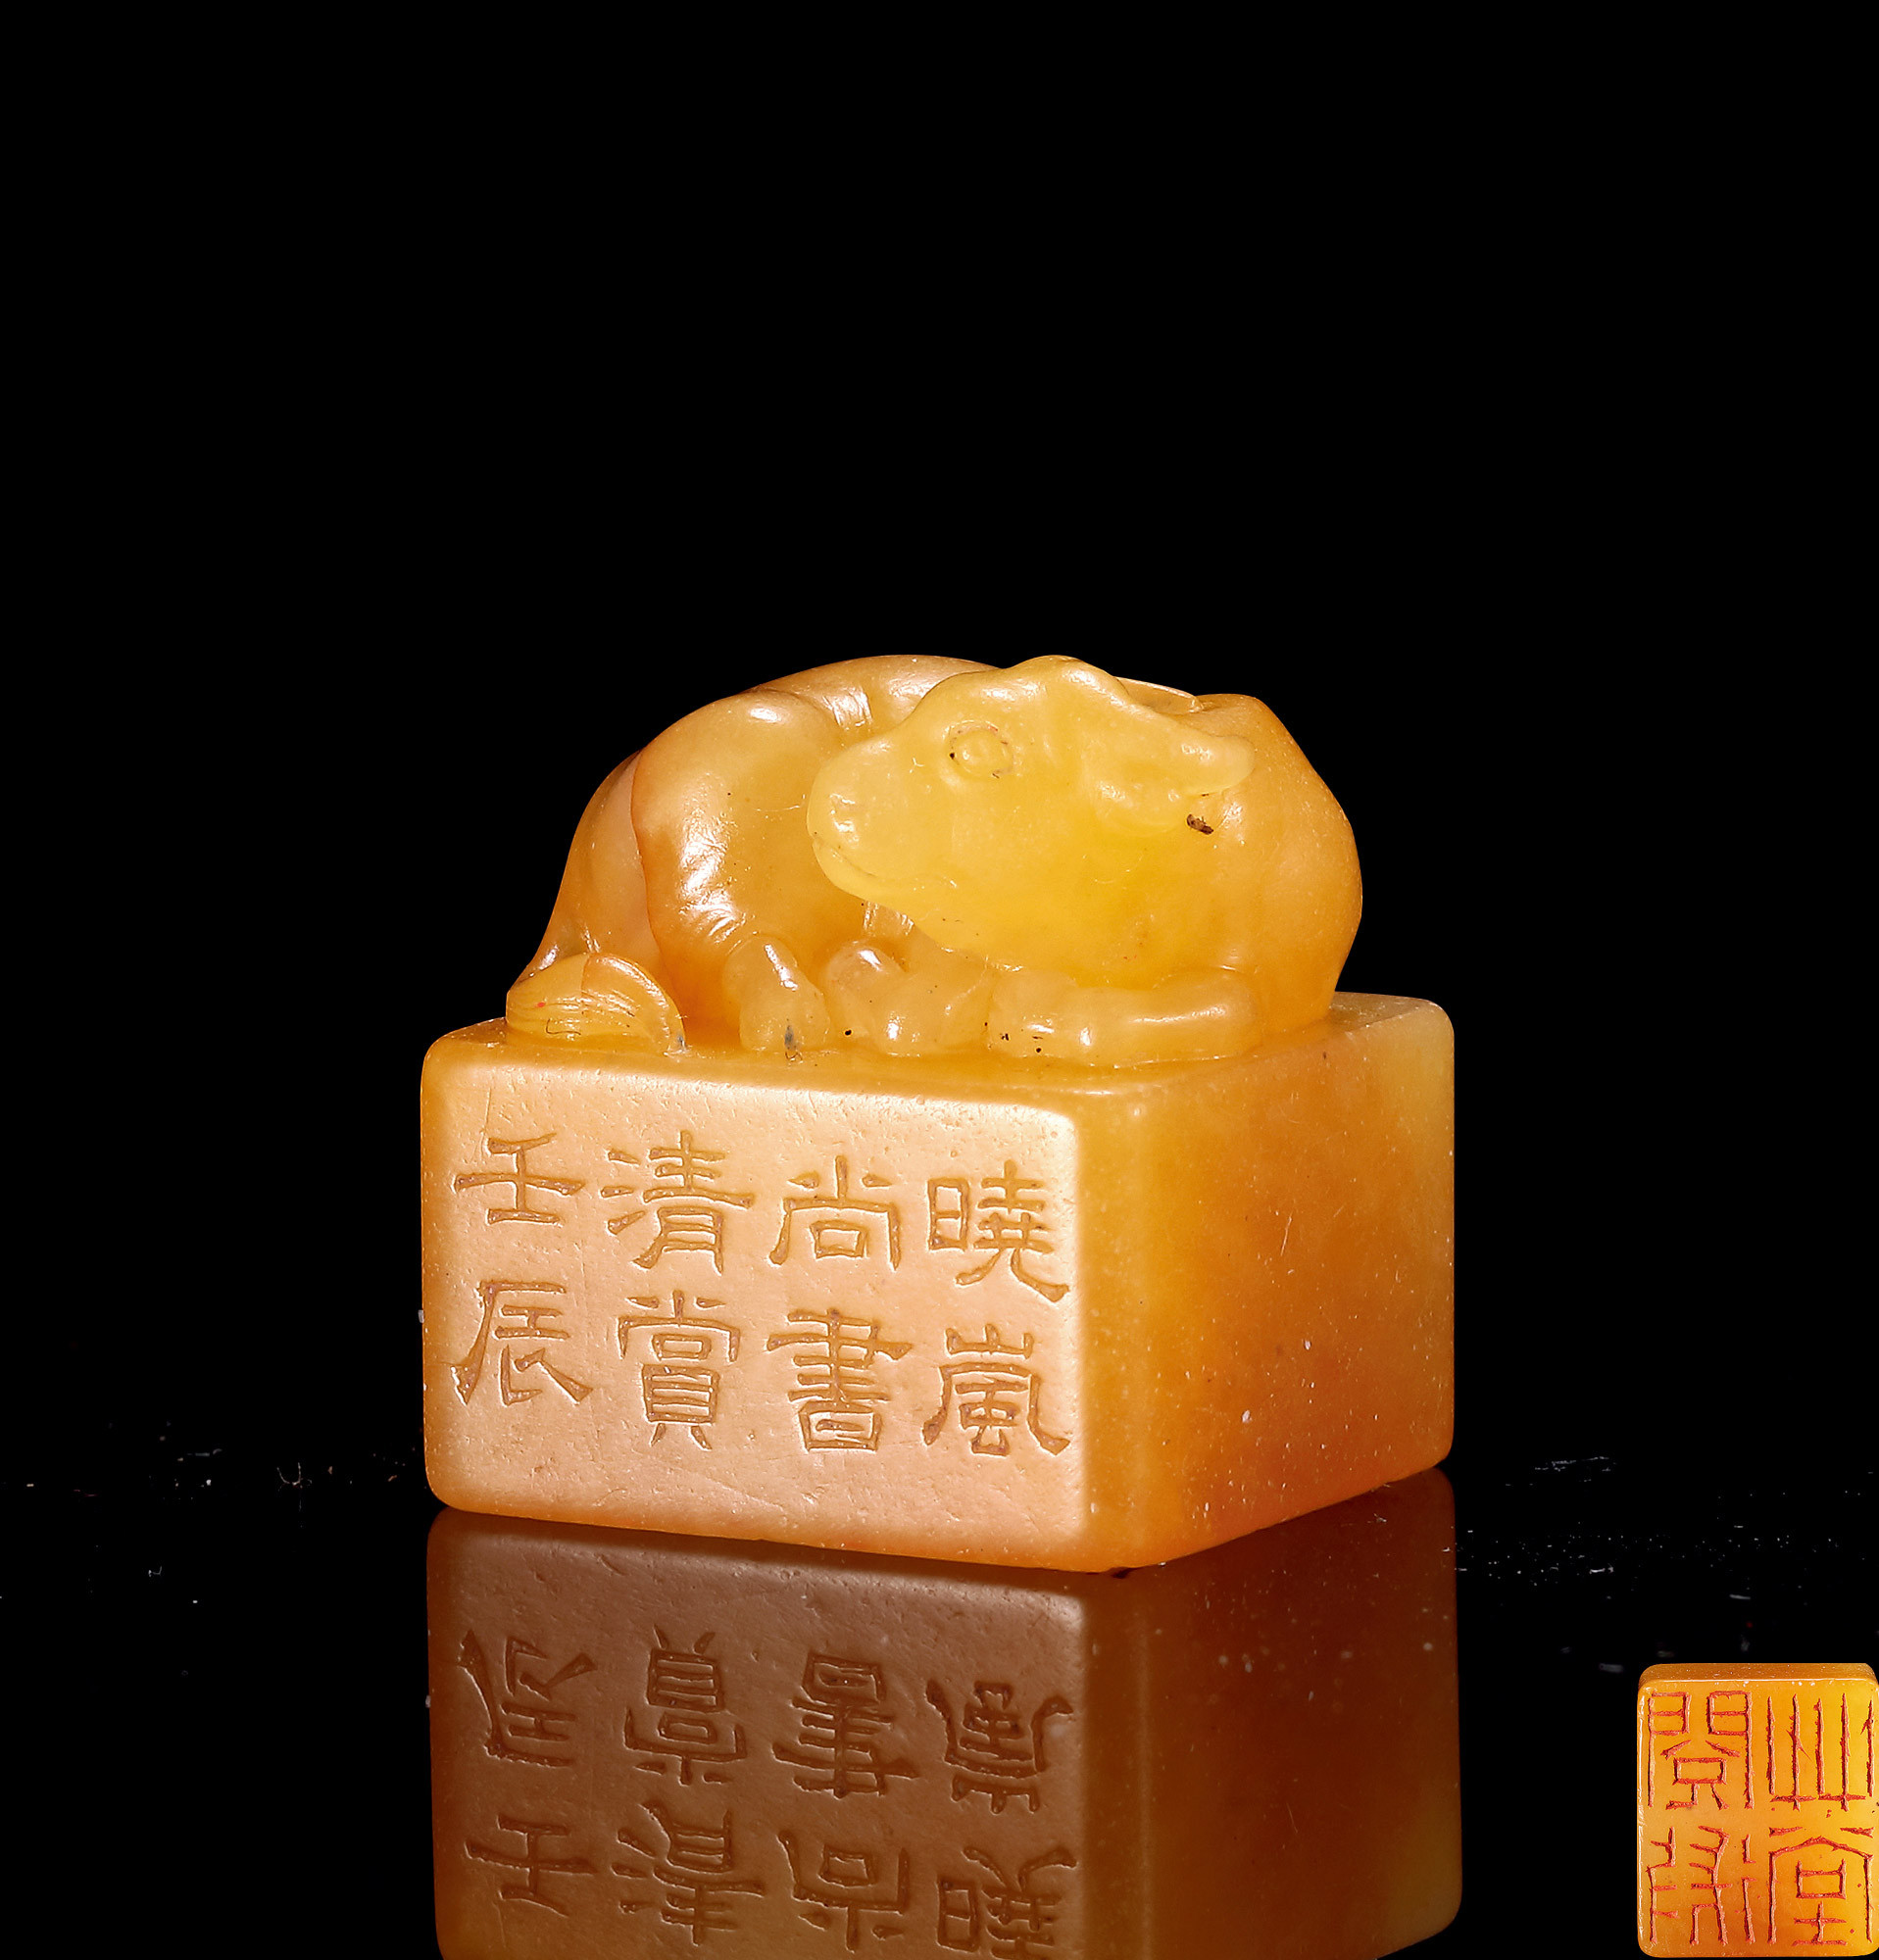 A TIANHUANG STONE SEAL WITH OX-KNOB, CARVED BY GUI FU FOR JI XIAO LAN